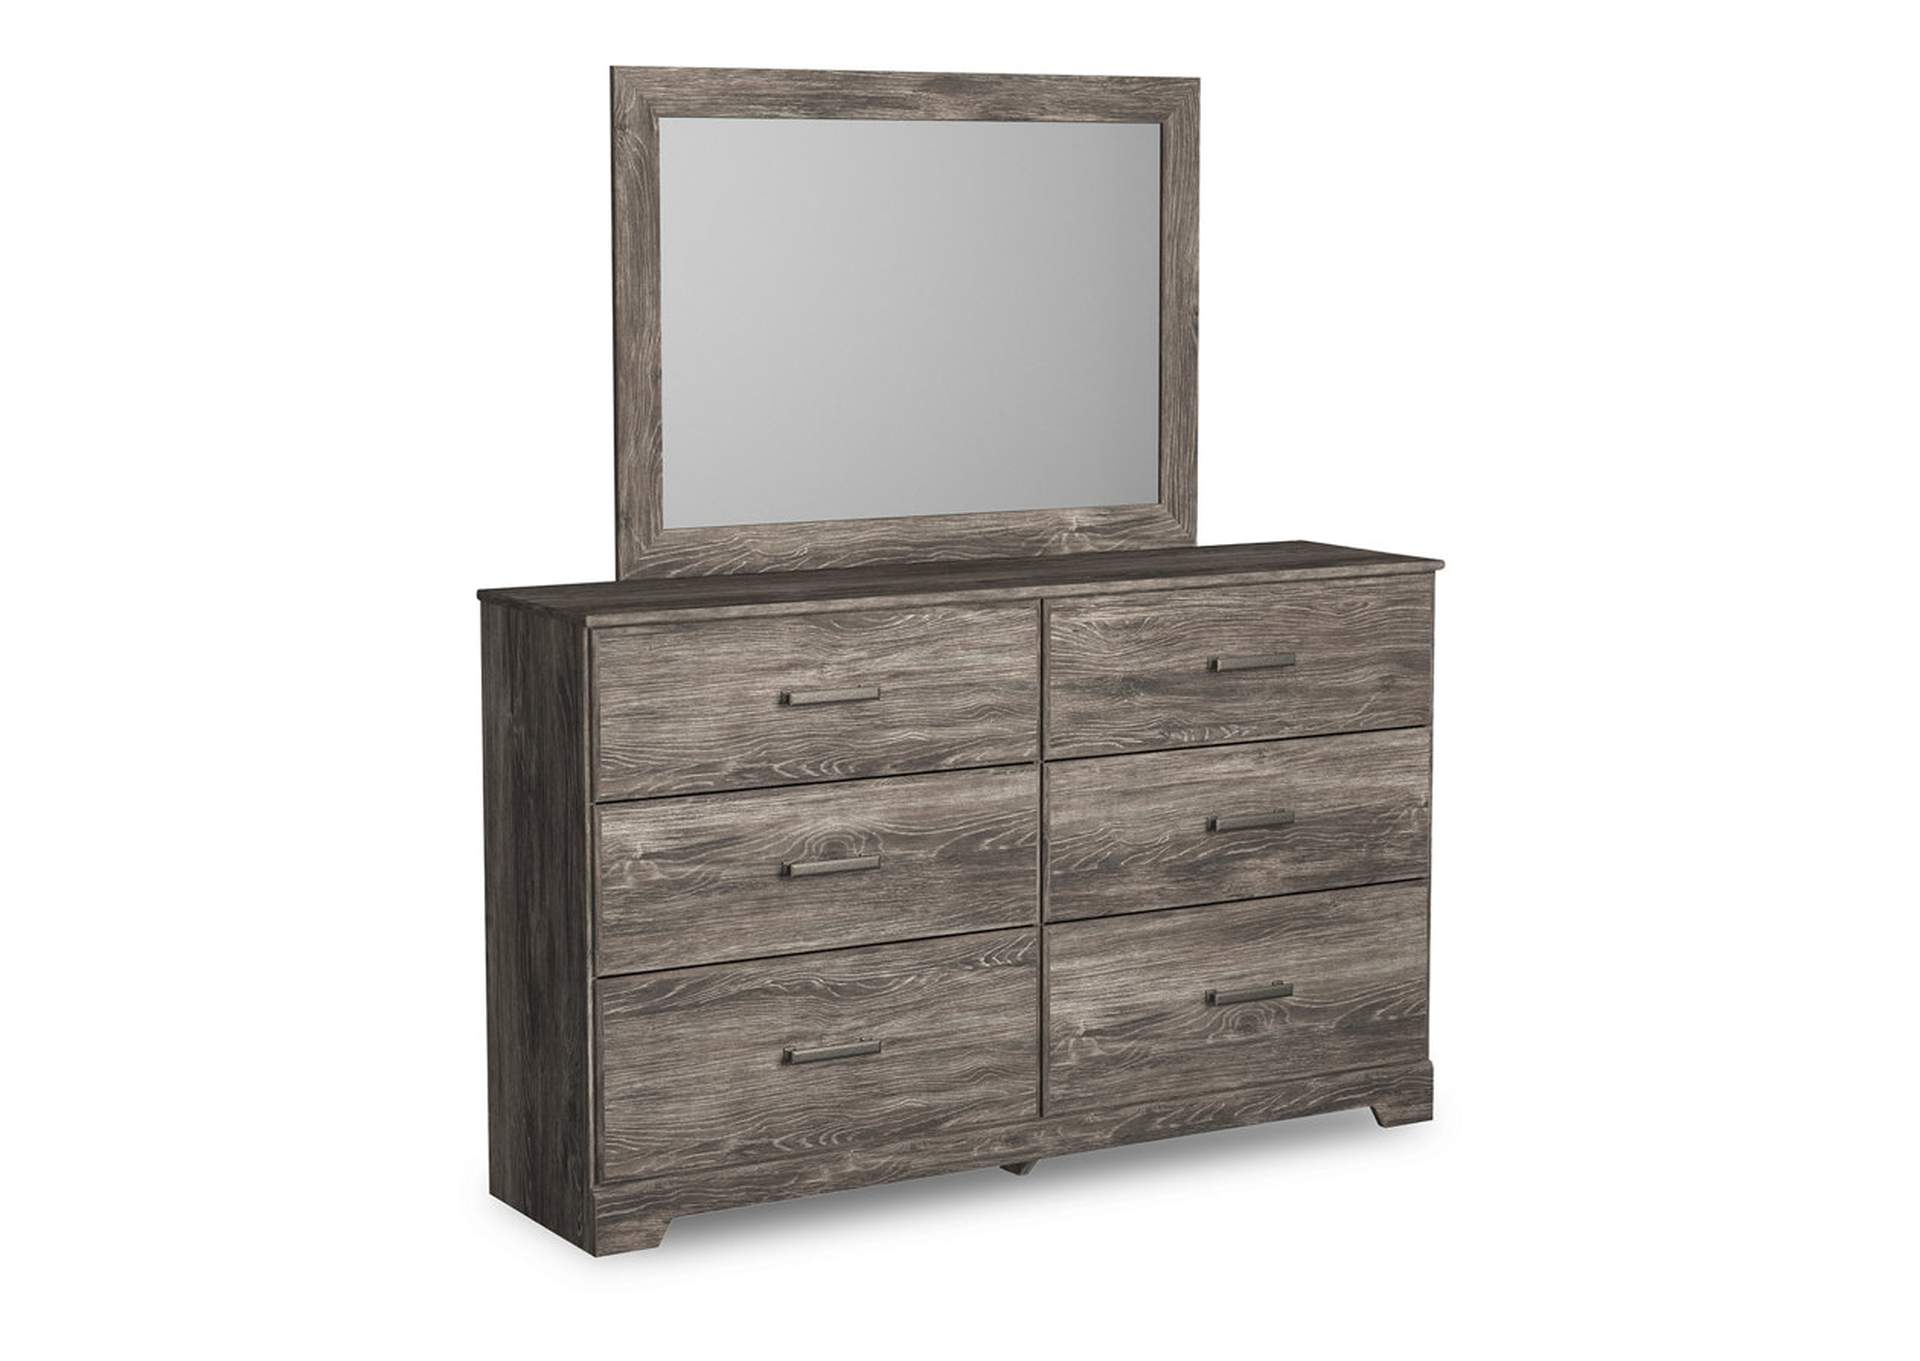 Ralinksi Twin Panel Bed with Mirrored Dresser and Nightstand,Signature Design By Ashley